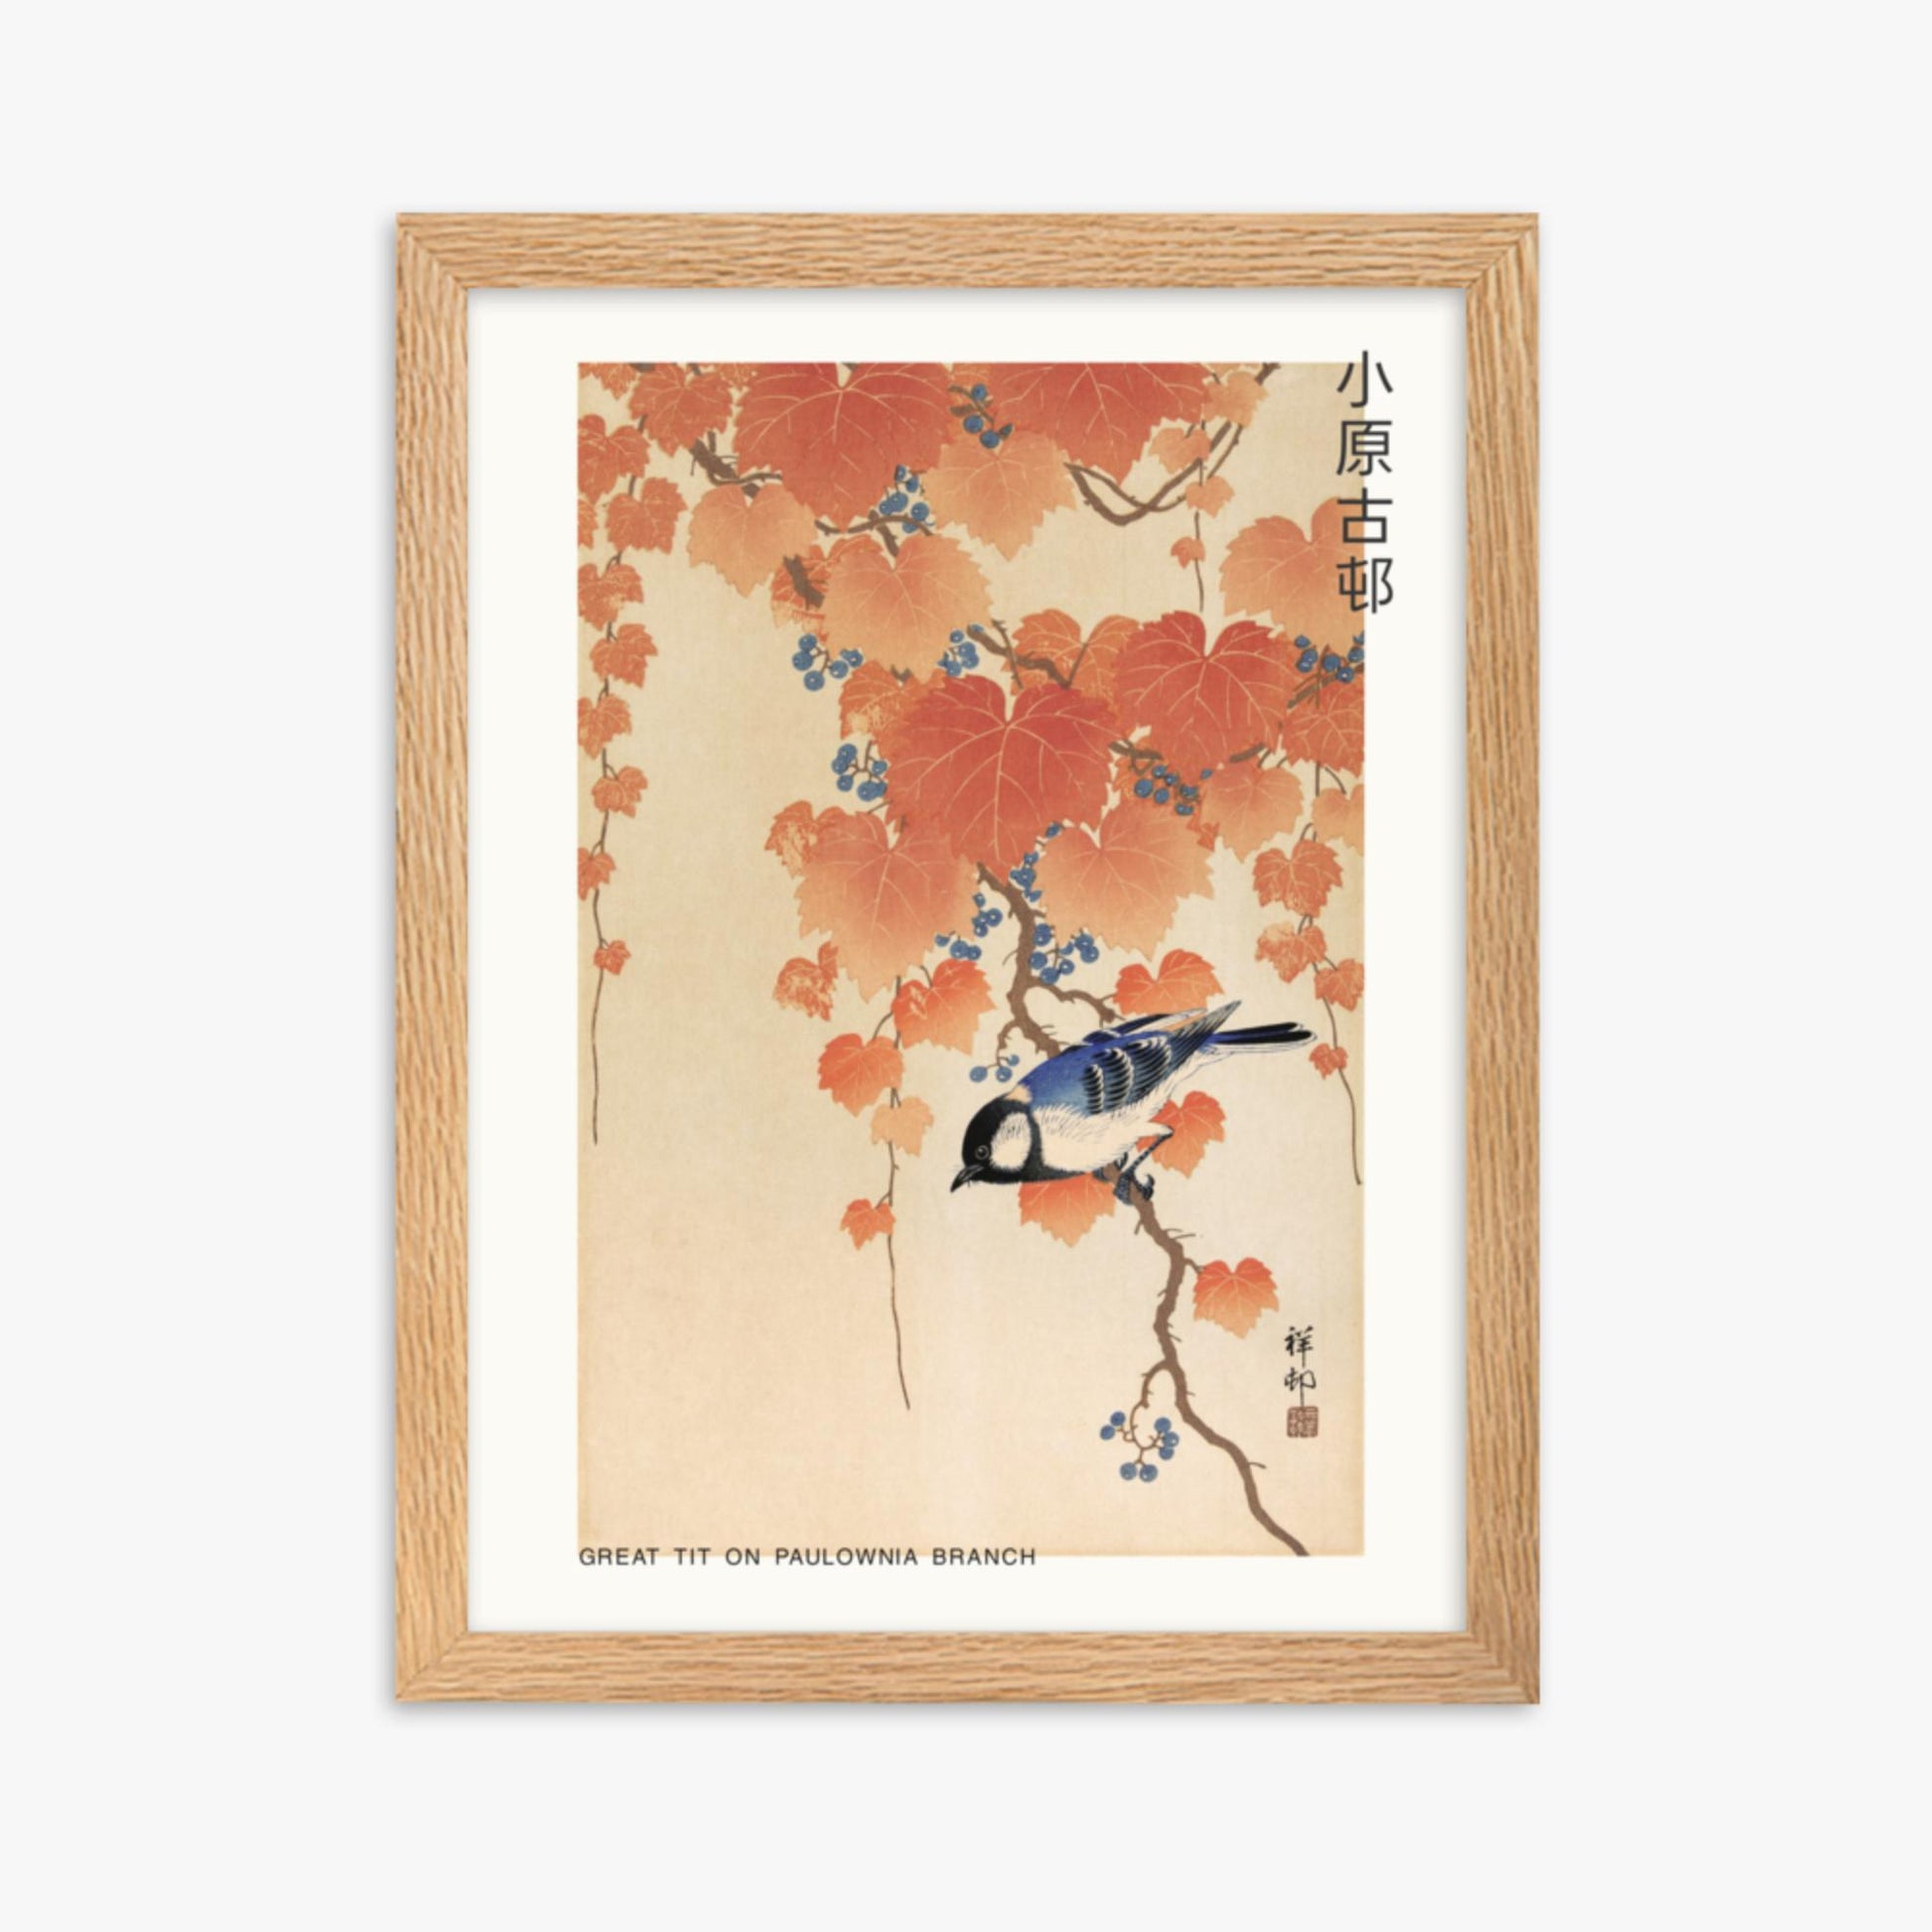 Ohara Koson - Great tit on paulownia branch - Decoration 30x40 cm Poster With Oak Frame